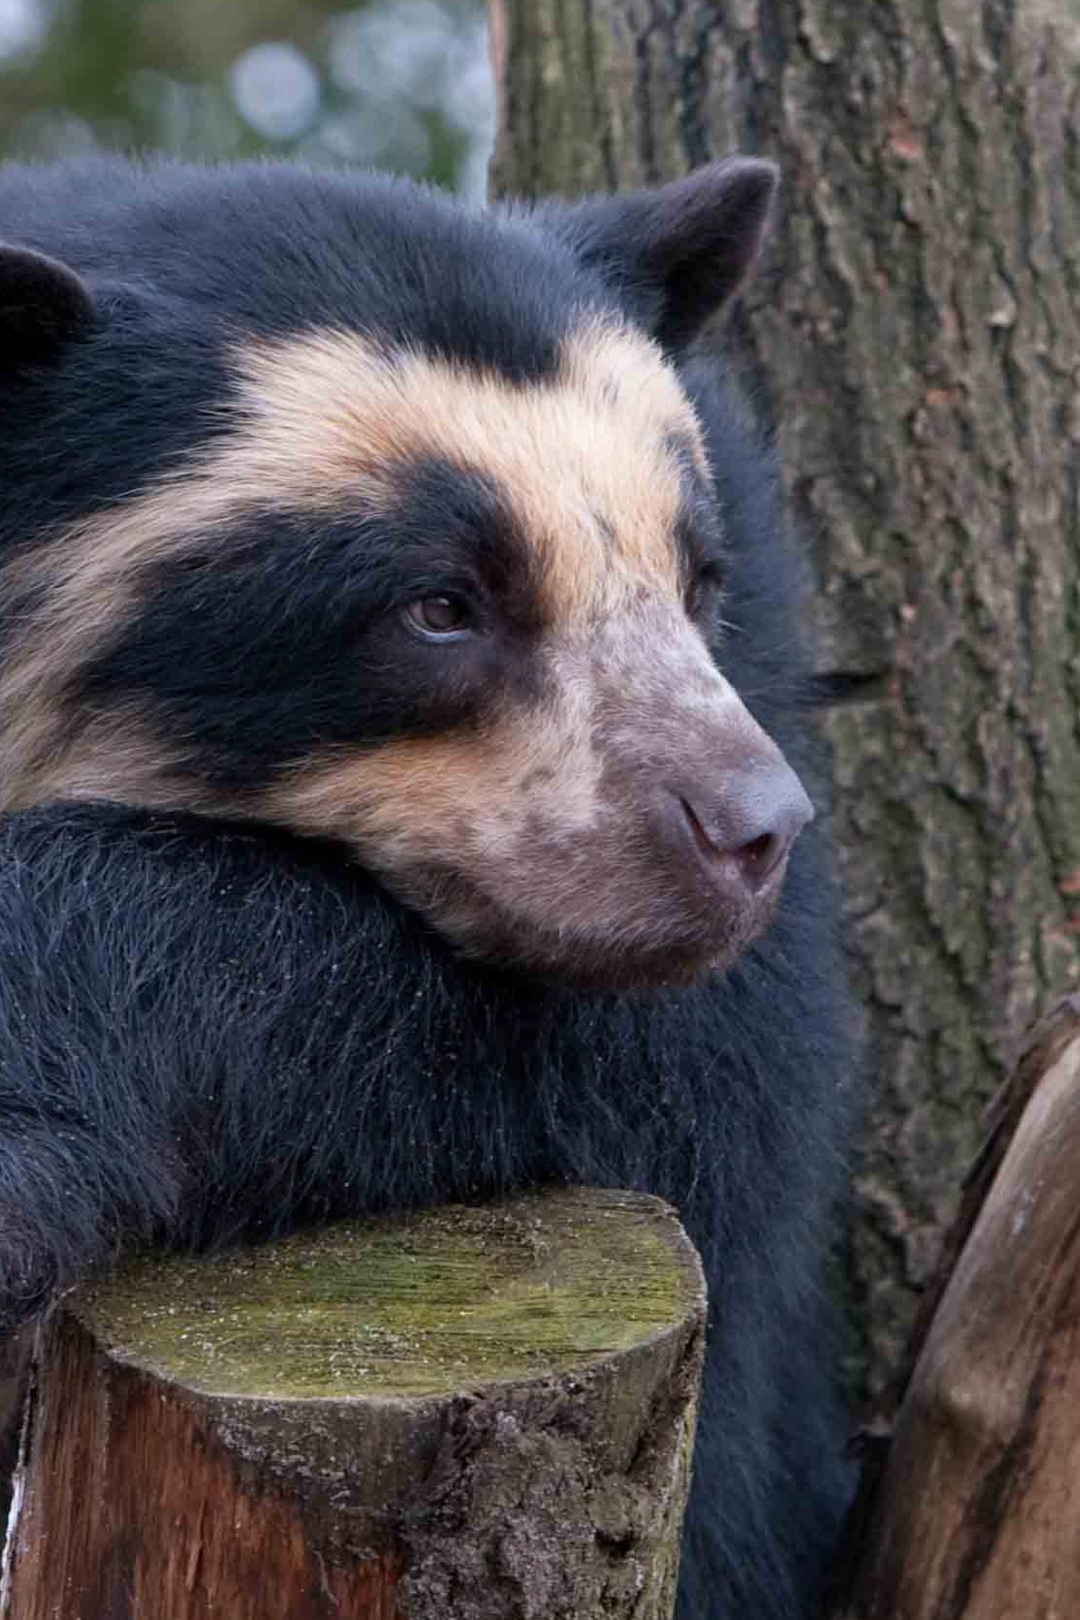 Image: Spectacled bear, predator, face, color, wood